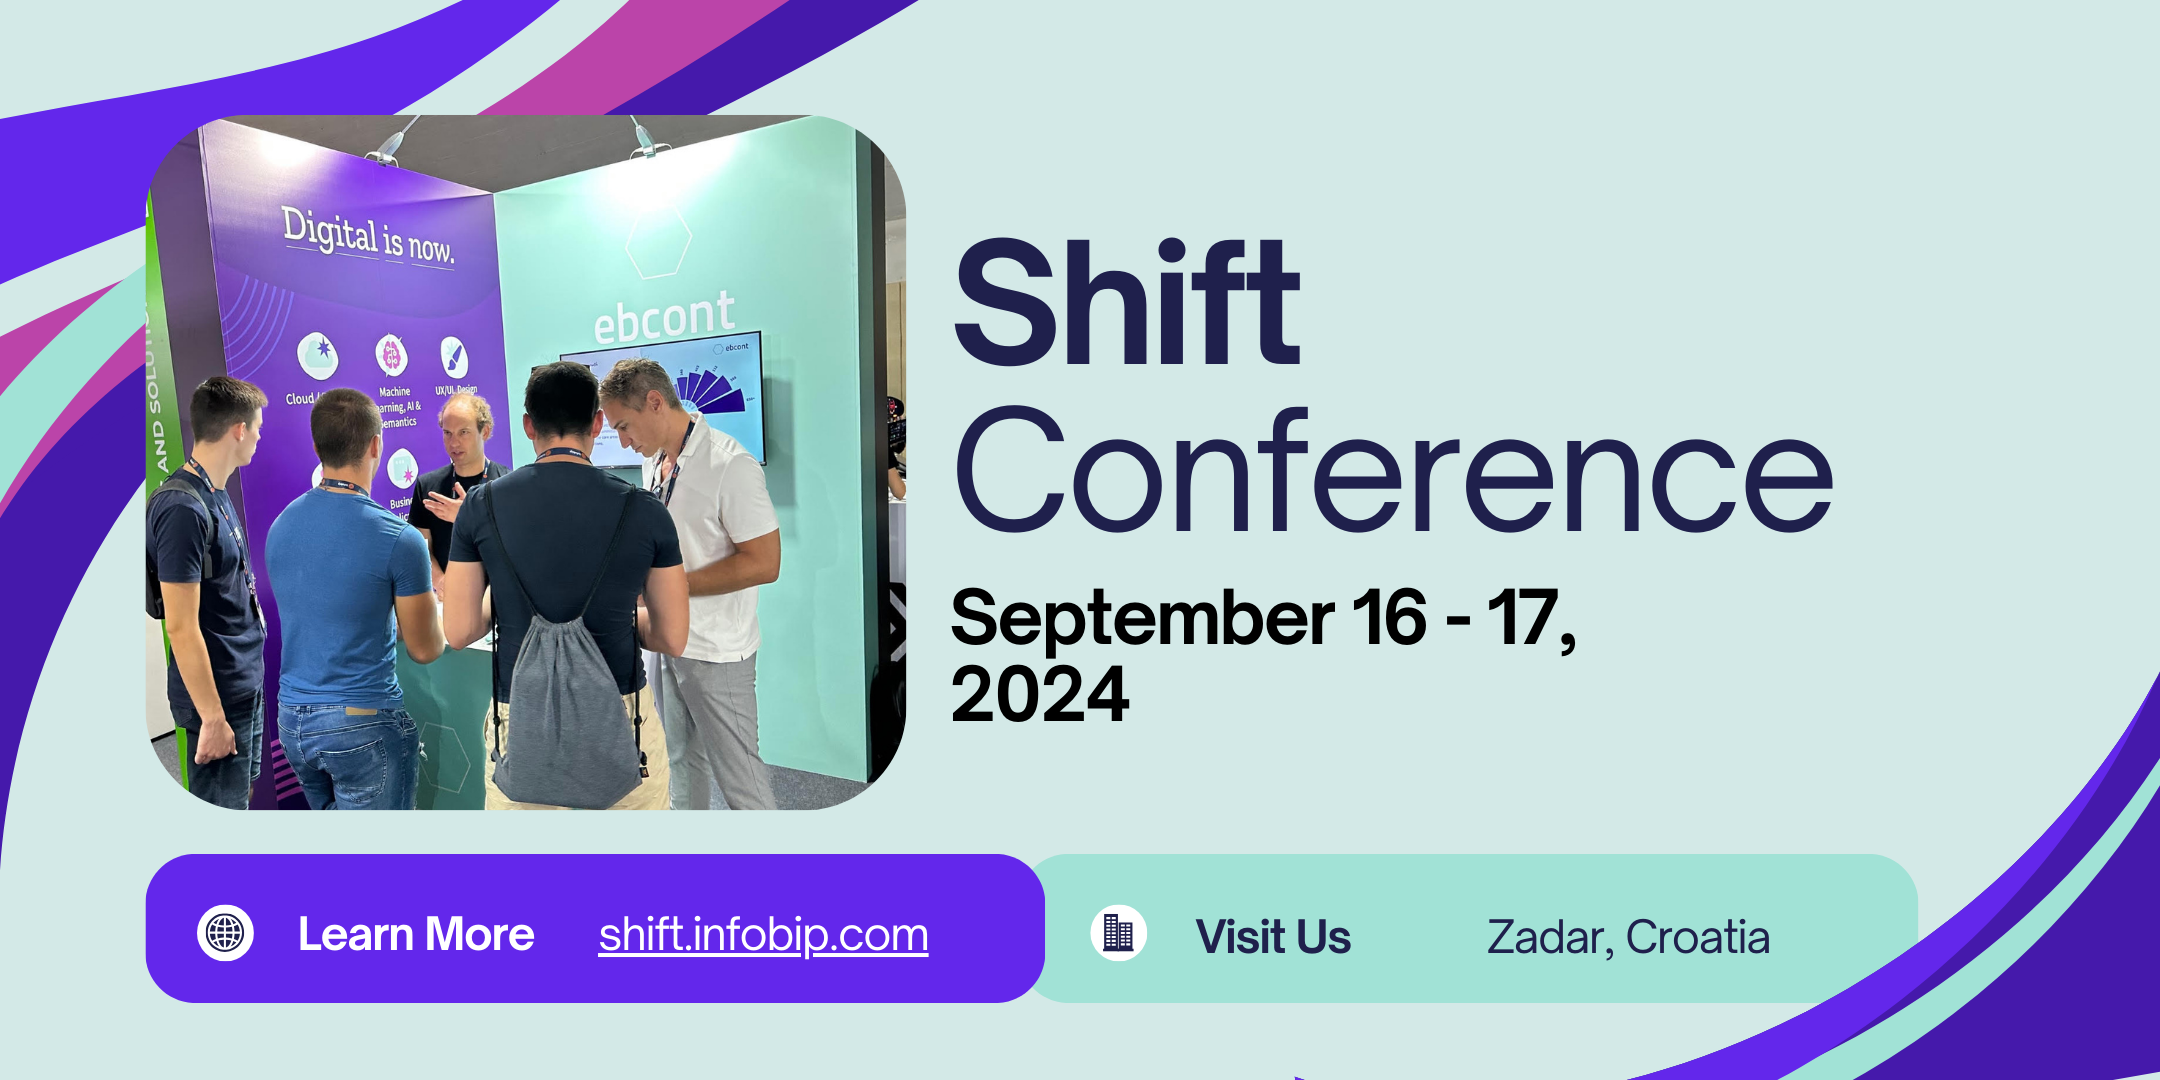 Shift Conference